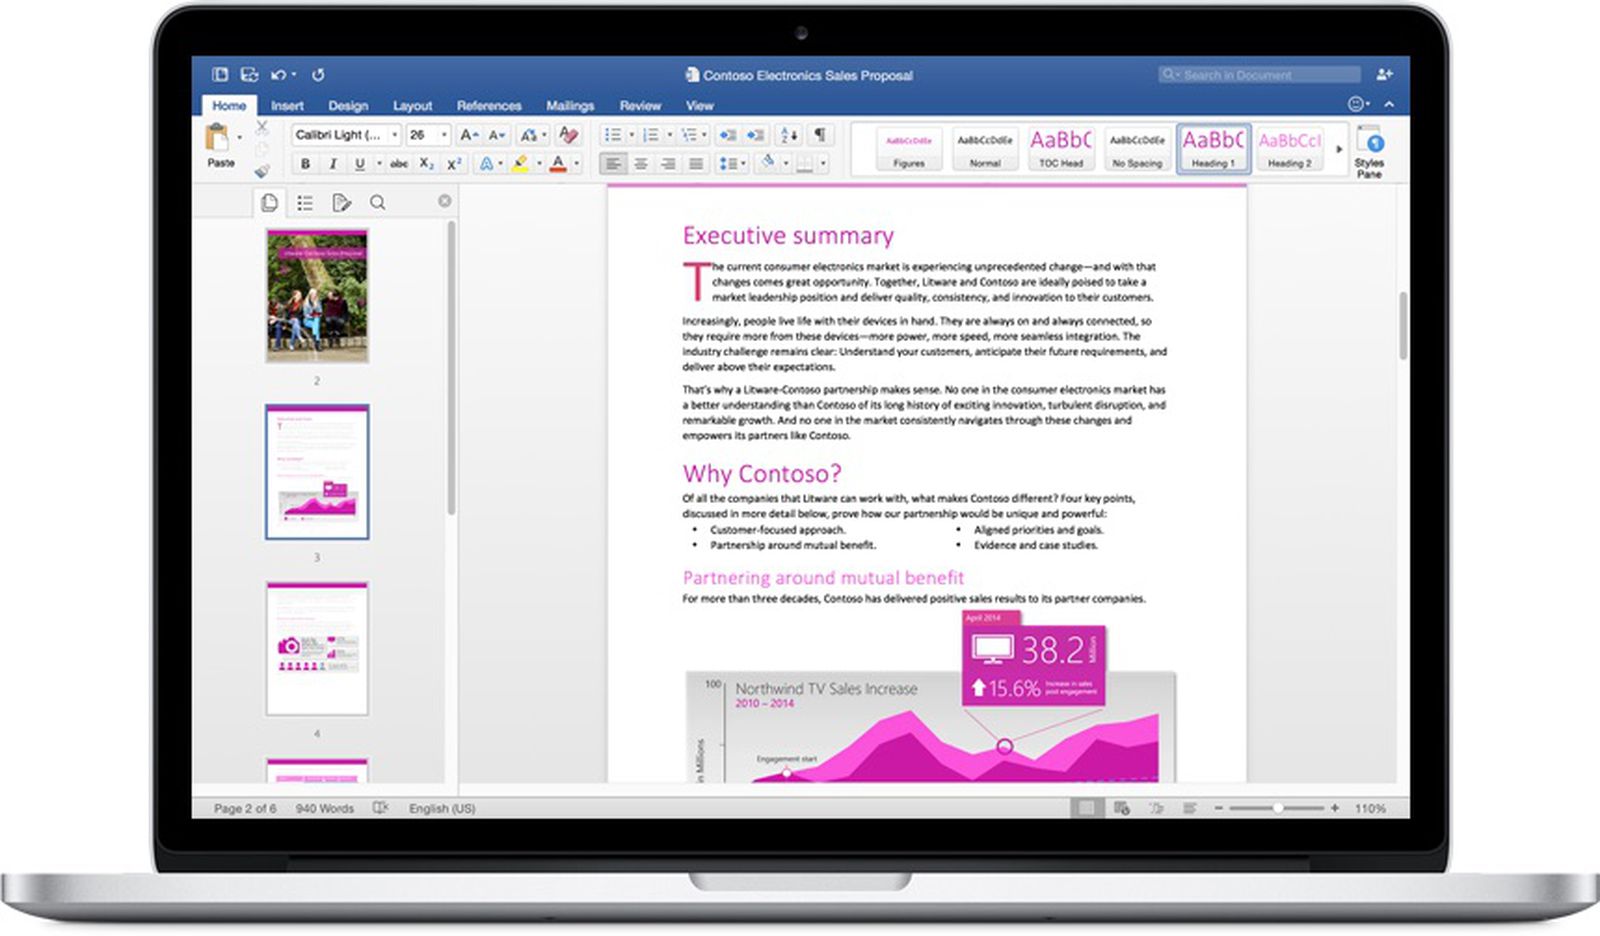 microsoft office for mac problems